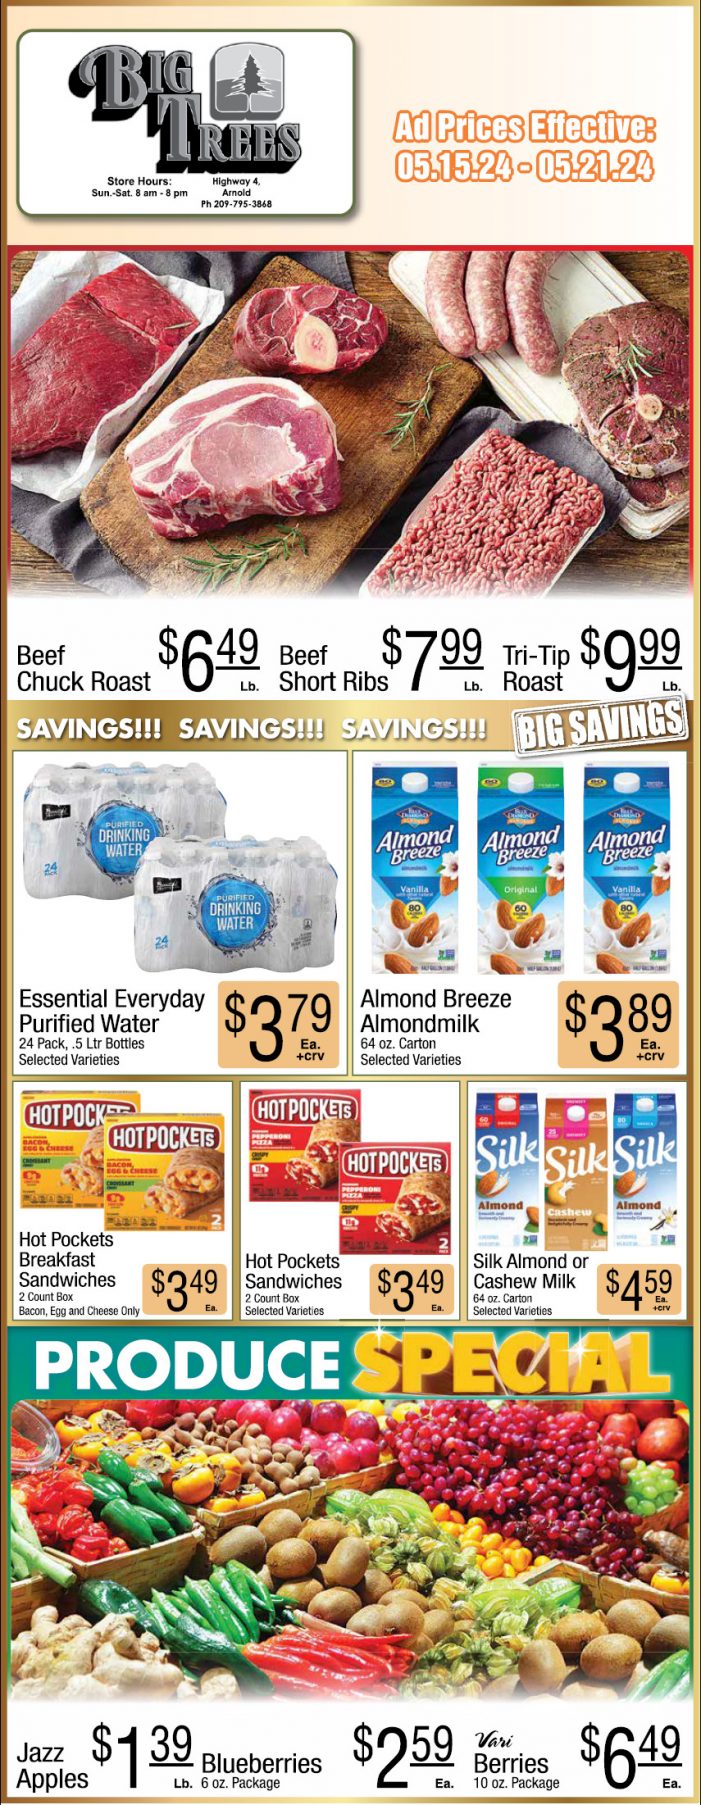 Big Trees Market Weekly Ad, Grocery, Produce, Meat & Deli Specials Through May 21! Shop Local & Save!